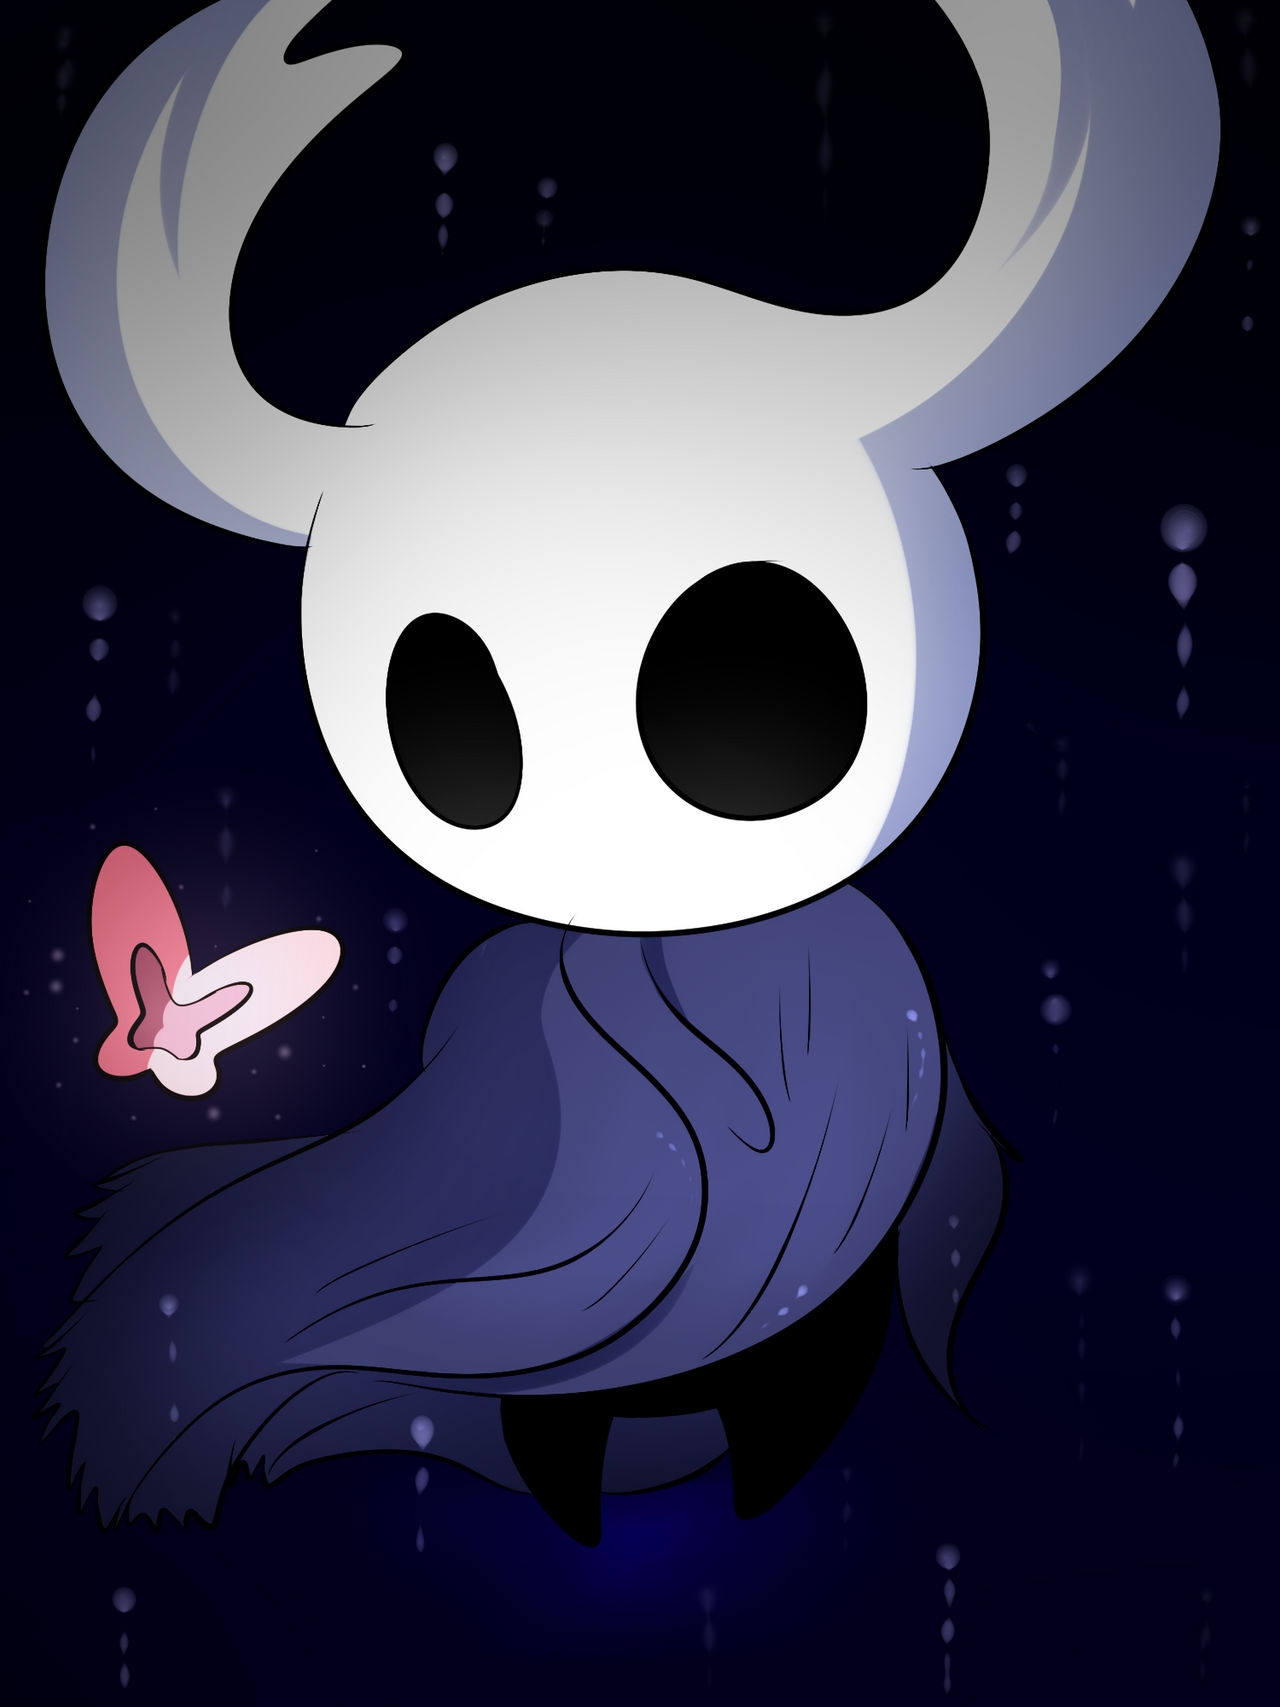 Hollow Knight And A Butterfly by DarkrexS on DeviantArt